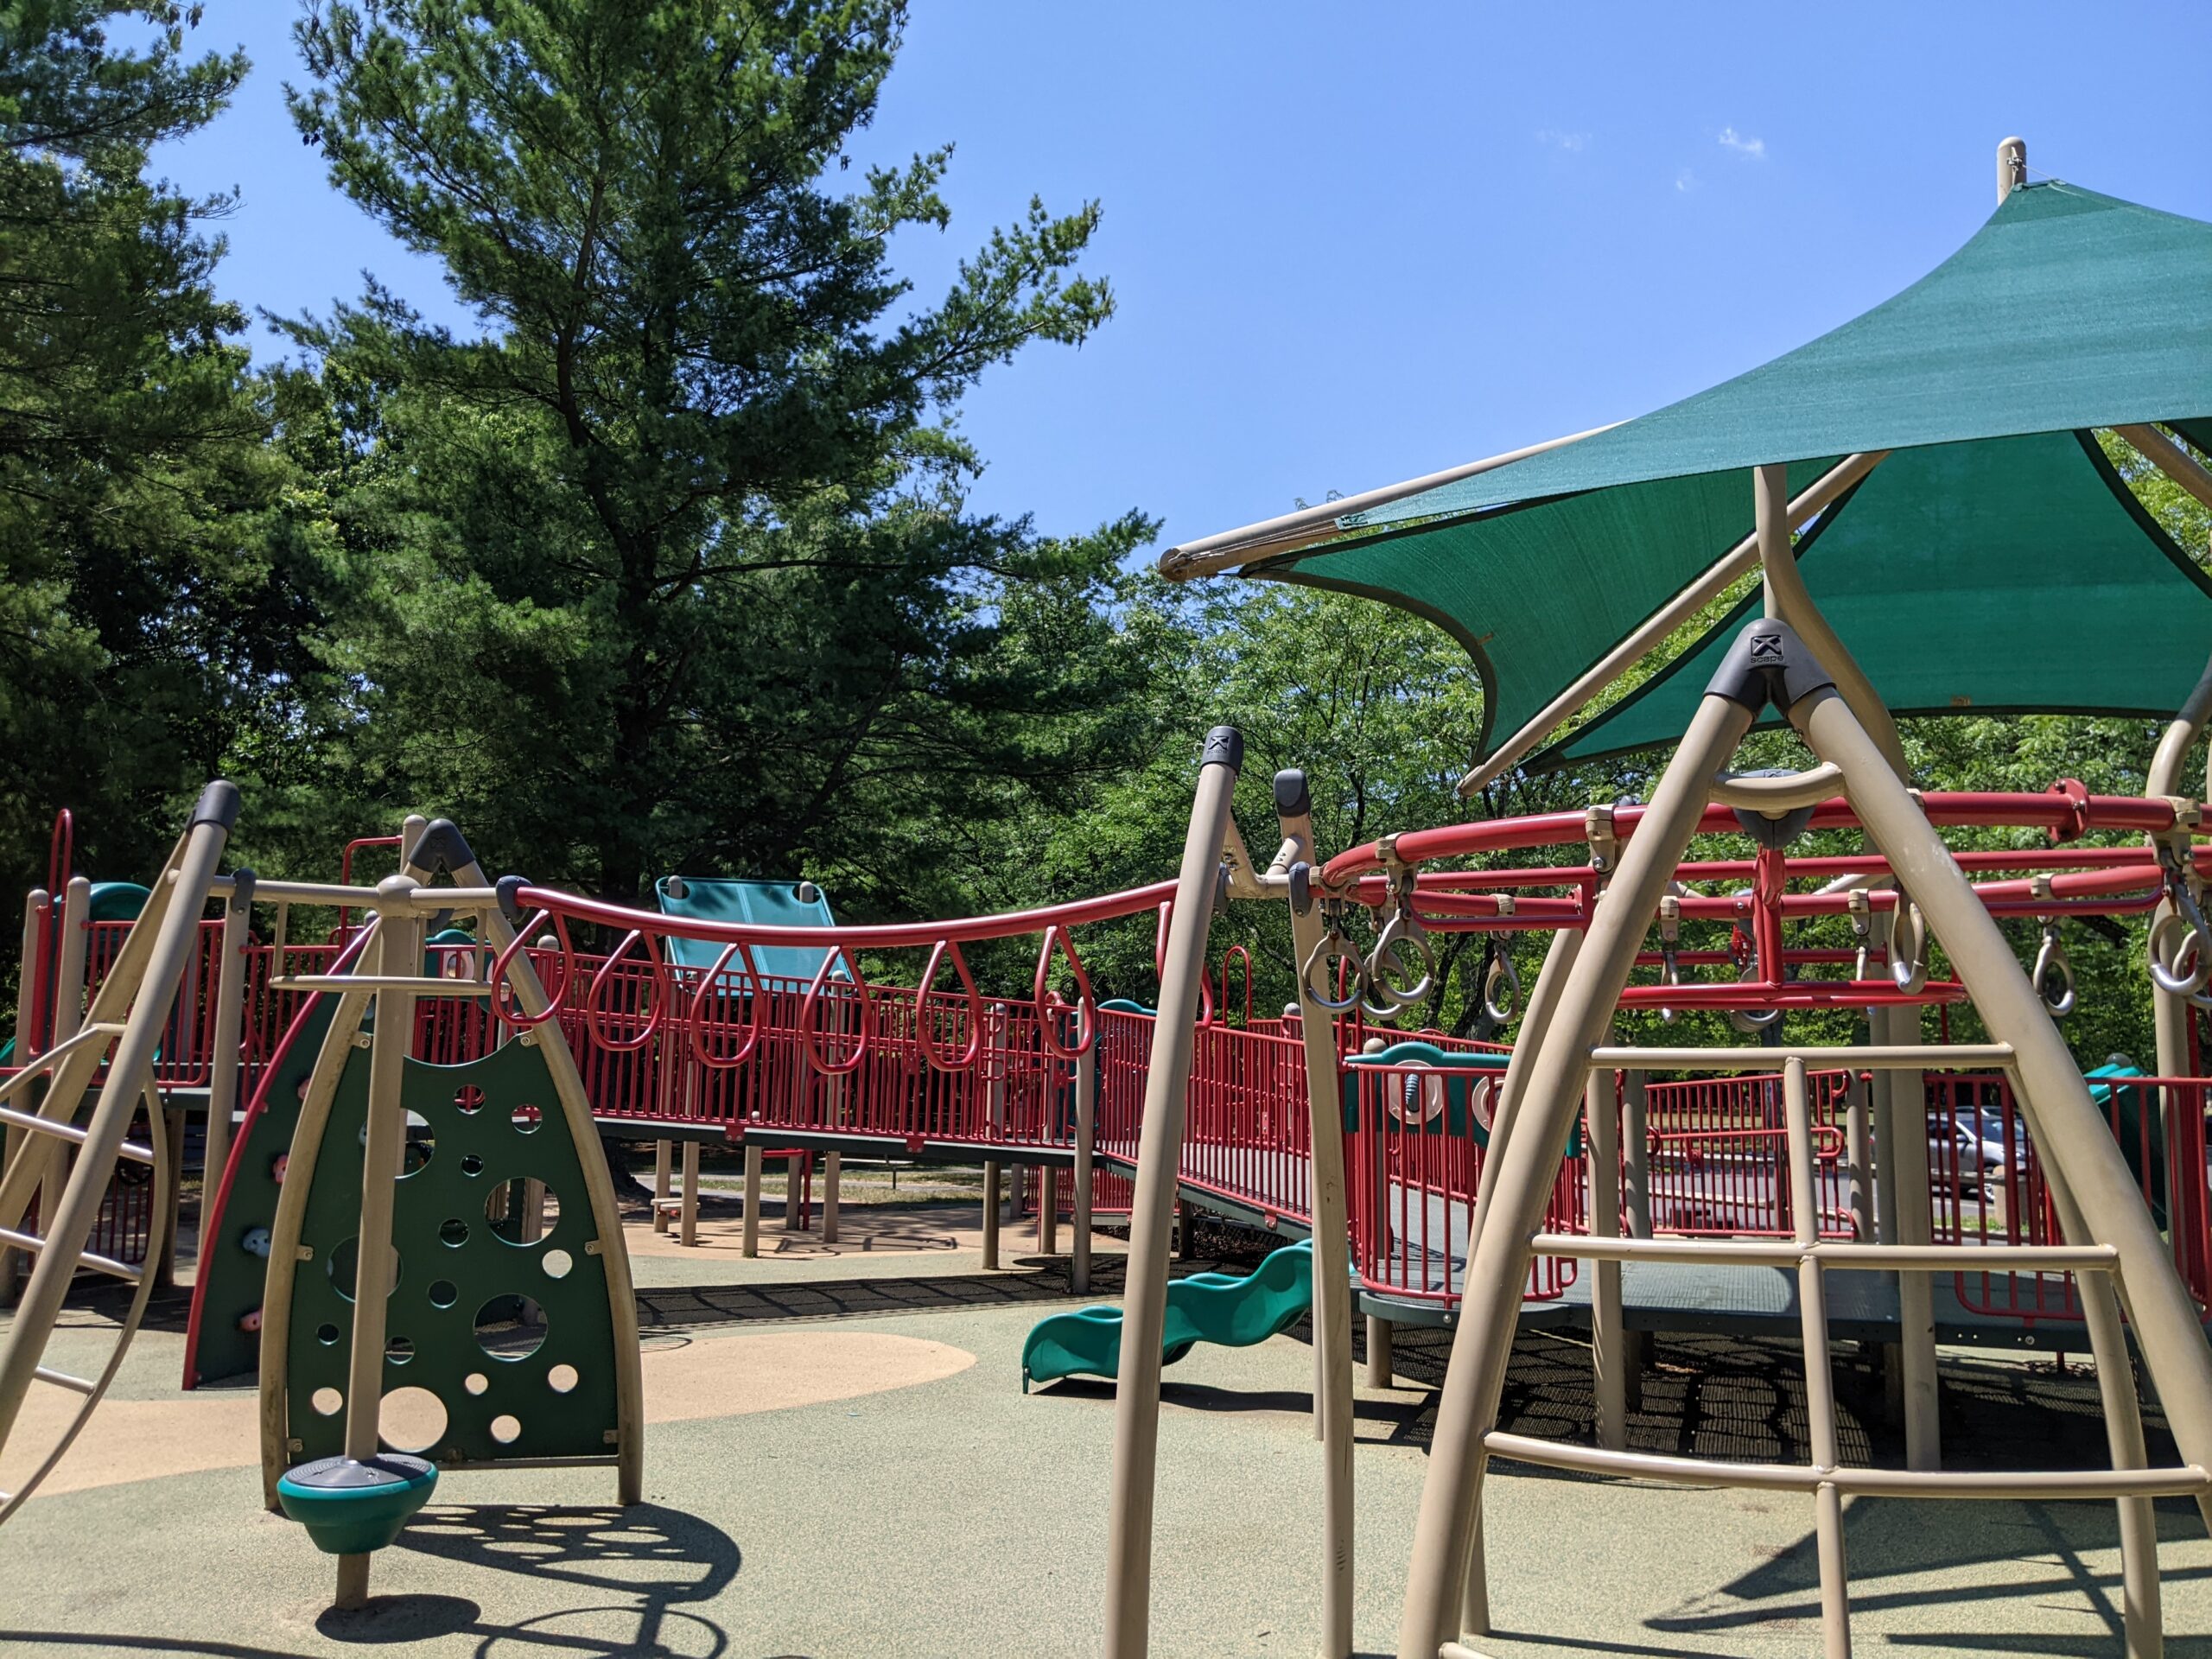 Children's Park Playground at Veteran's Park in Hamilton Township NJ - Special Features - Monkey Bars